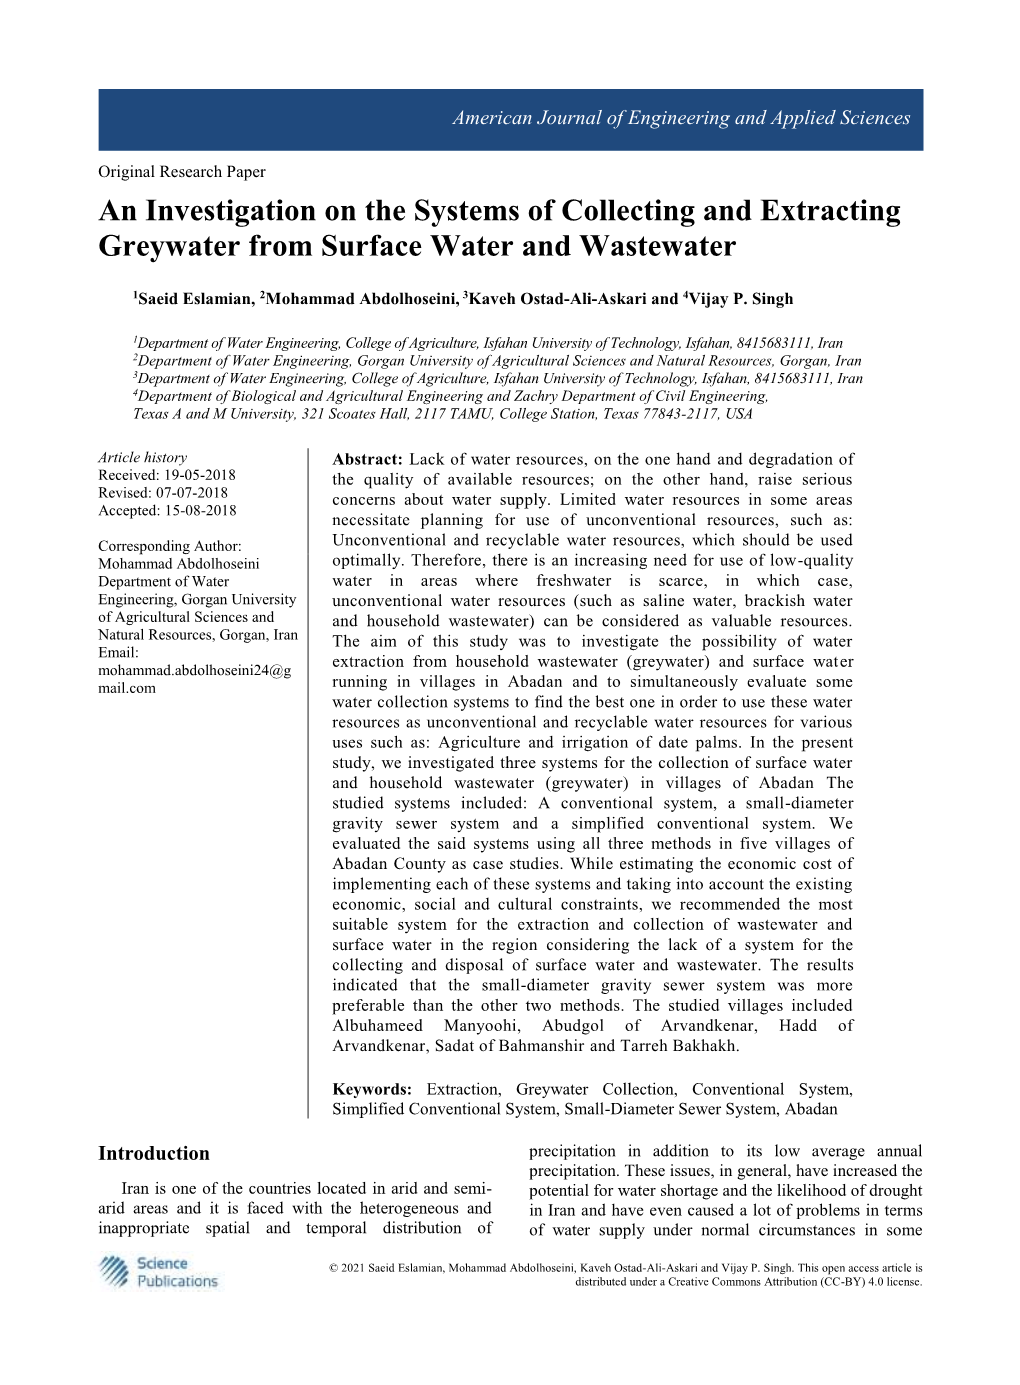 An Investigation on the Systems of Collecting and Extracting Greywater from Surface Water and Wastewater